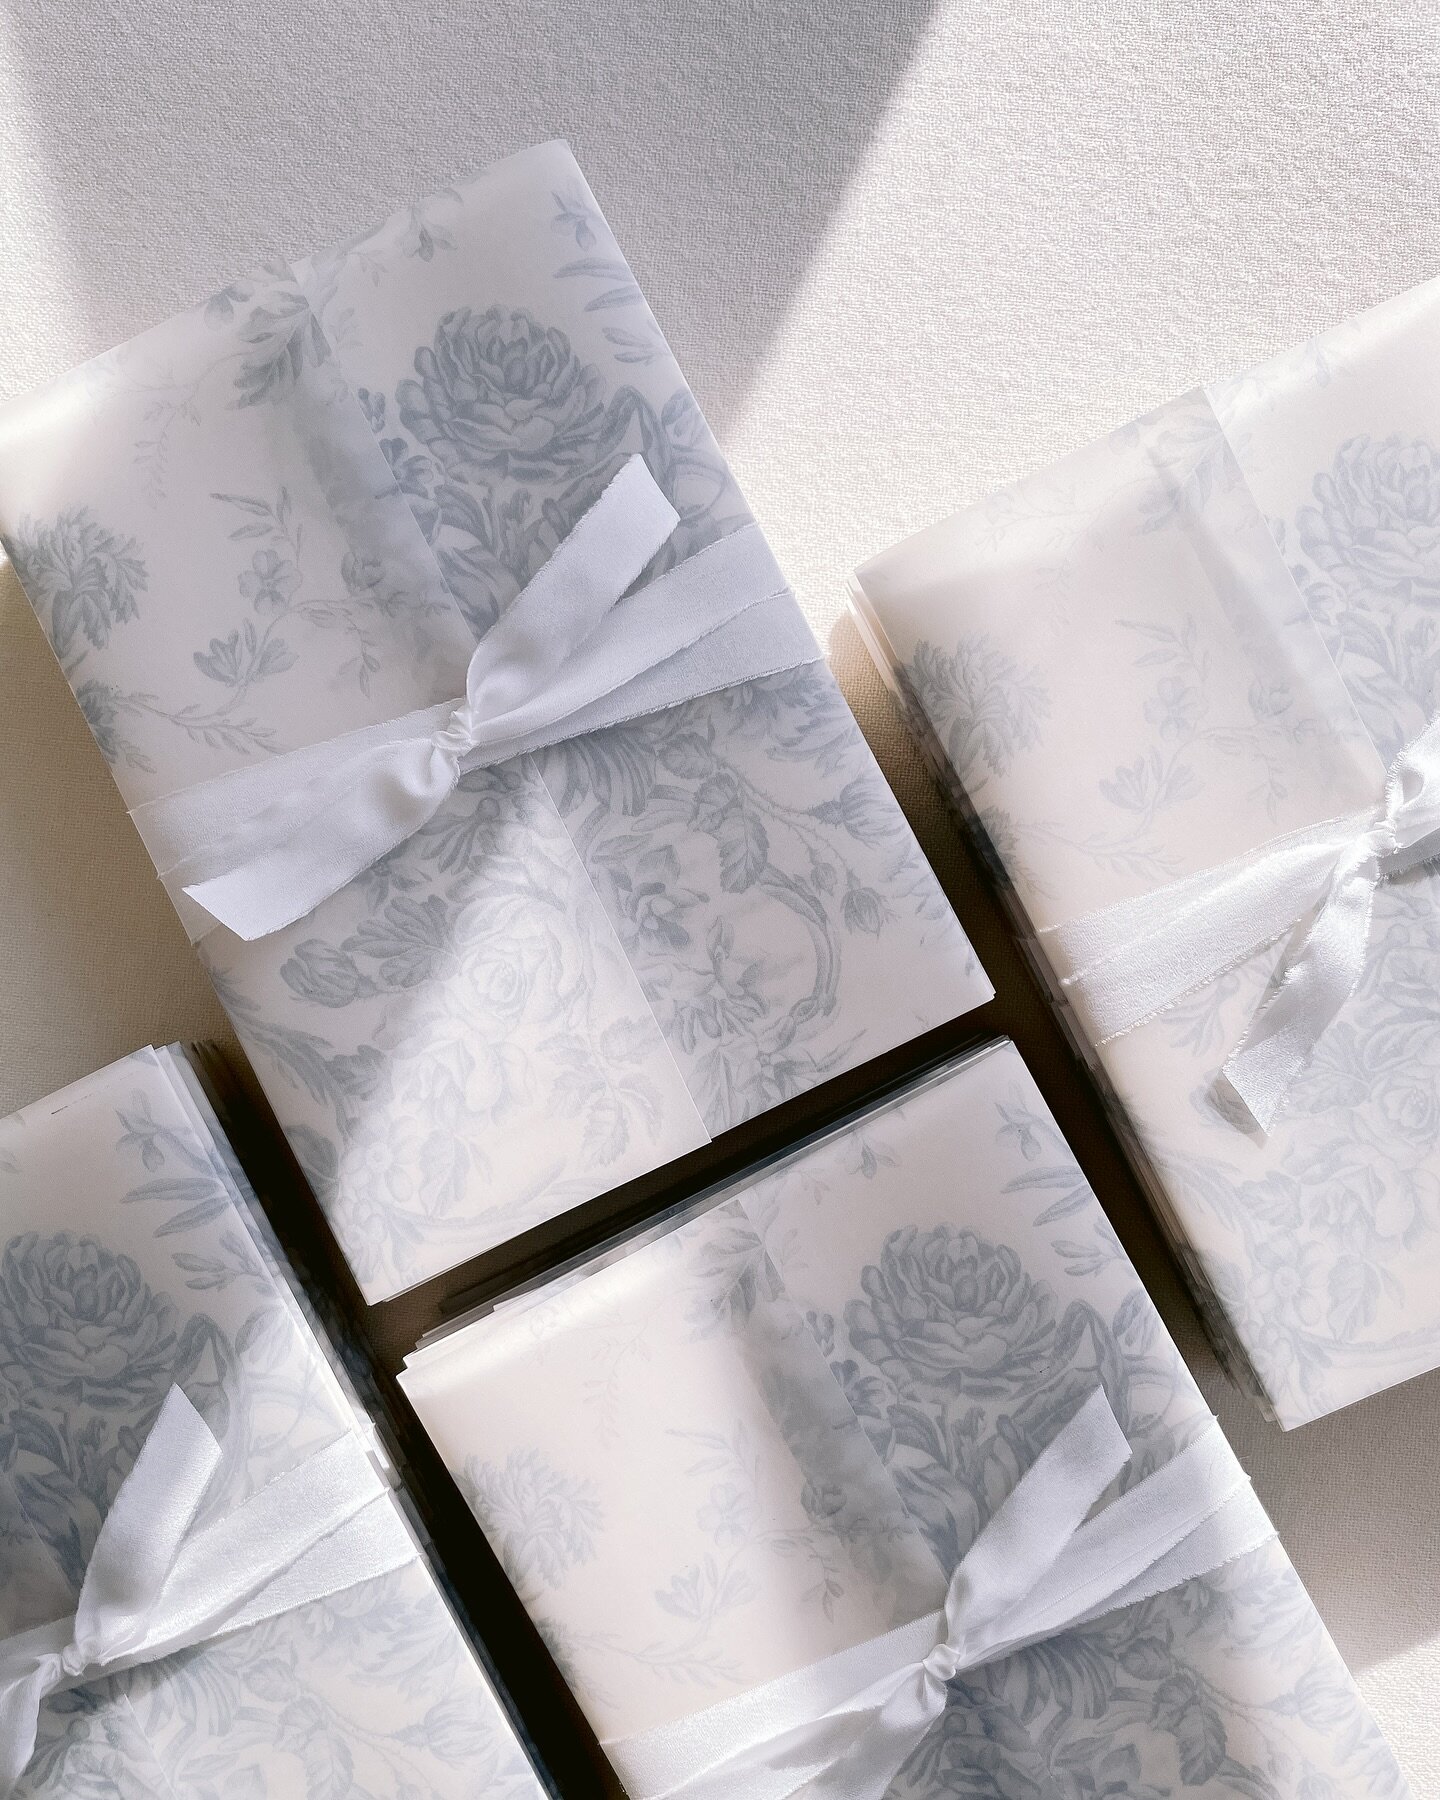 Pretty vellum and silk wrapped stacks for A&amp;J!